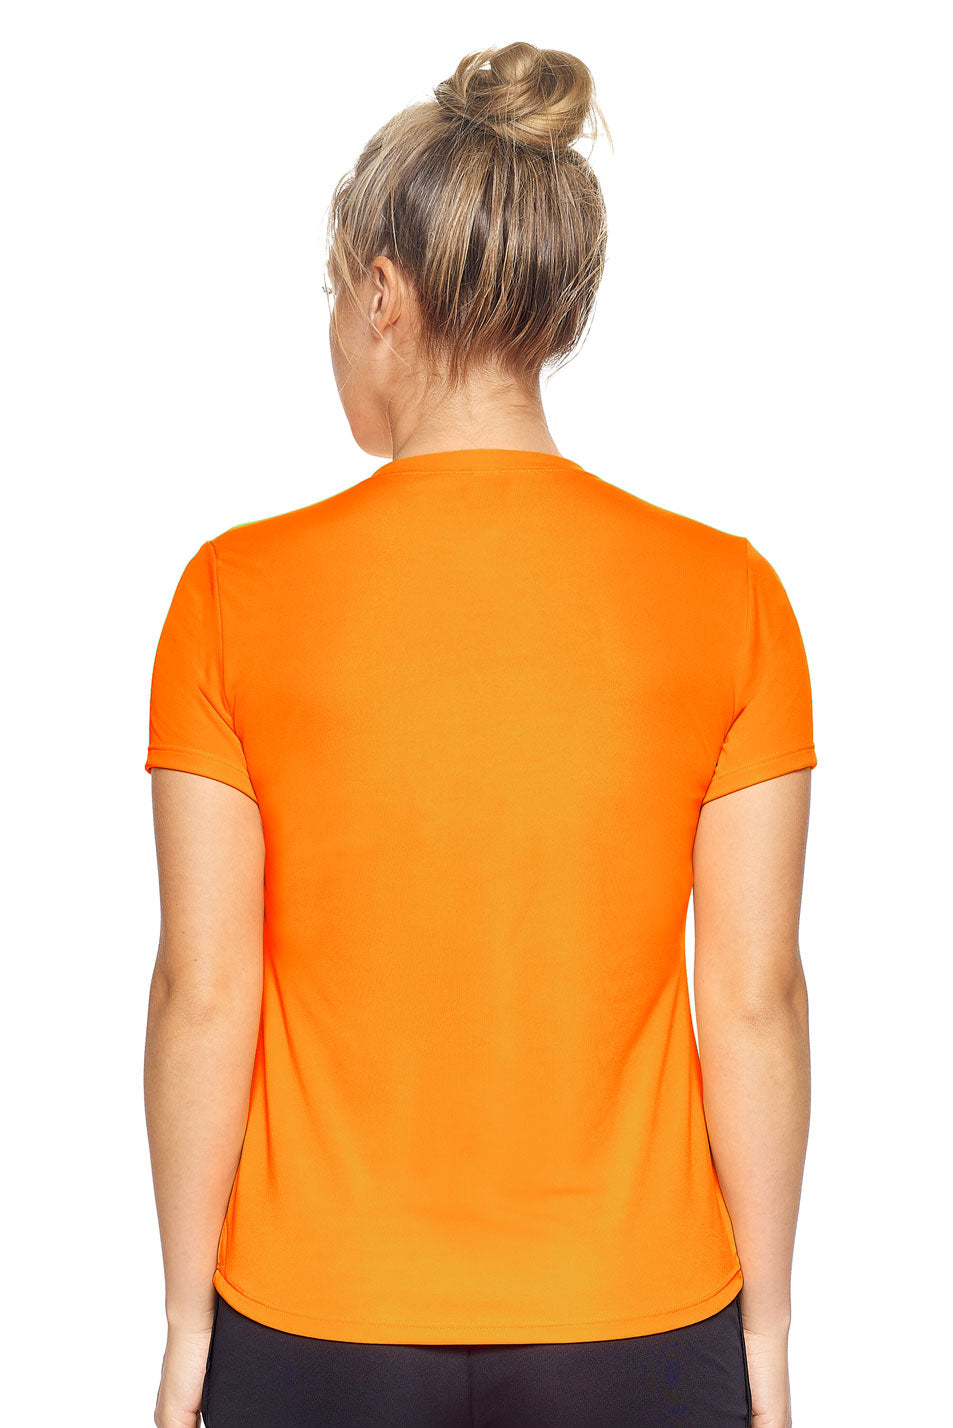 Expert Brand Apparel Made in USA Women's Drimax Crewneck Tec Tec in Safety Orange image 3#color_safety-orange